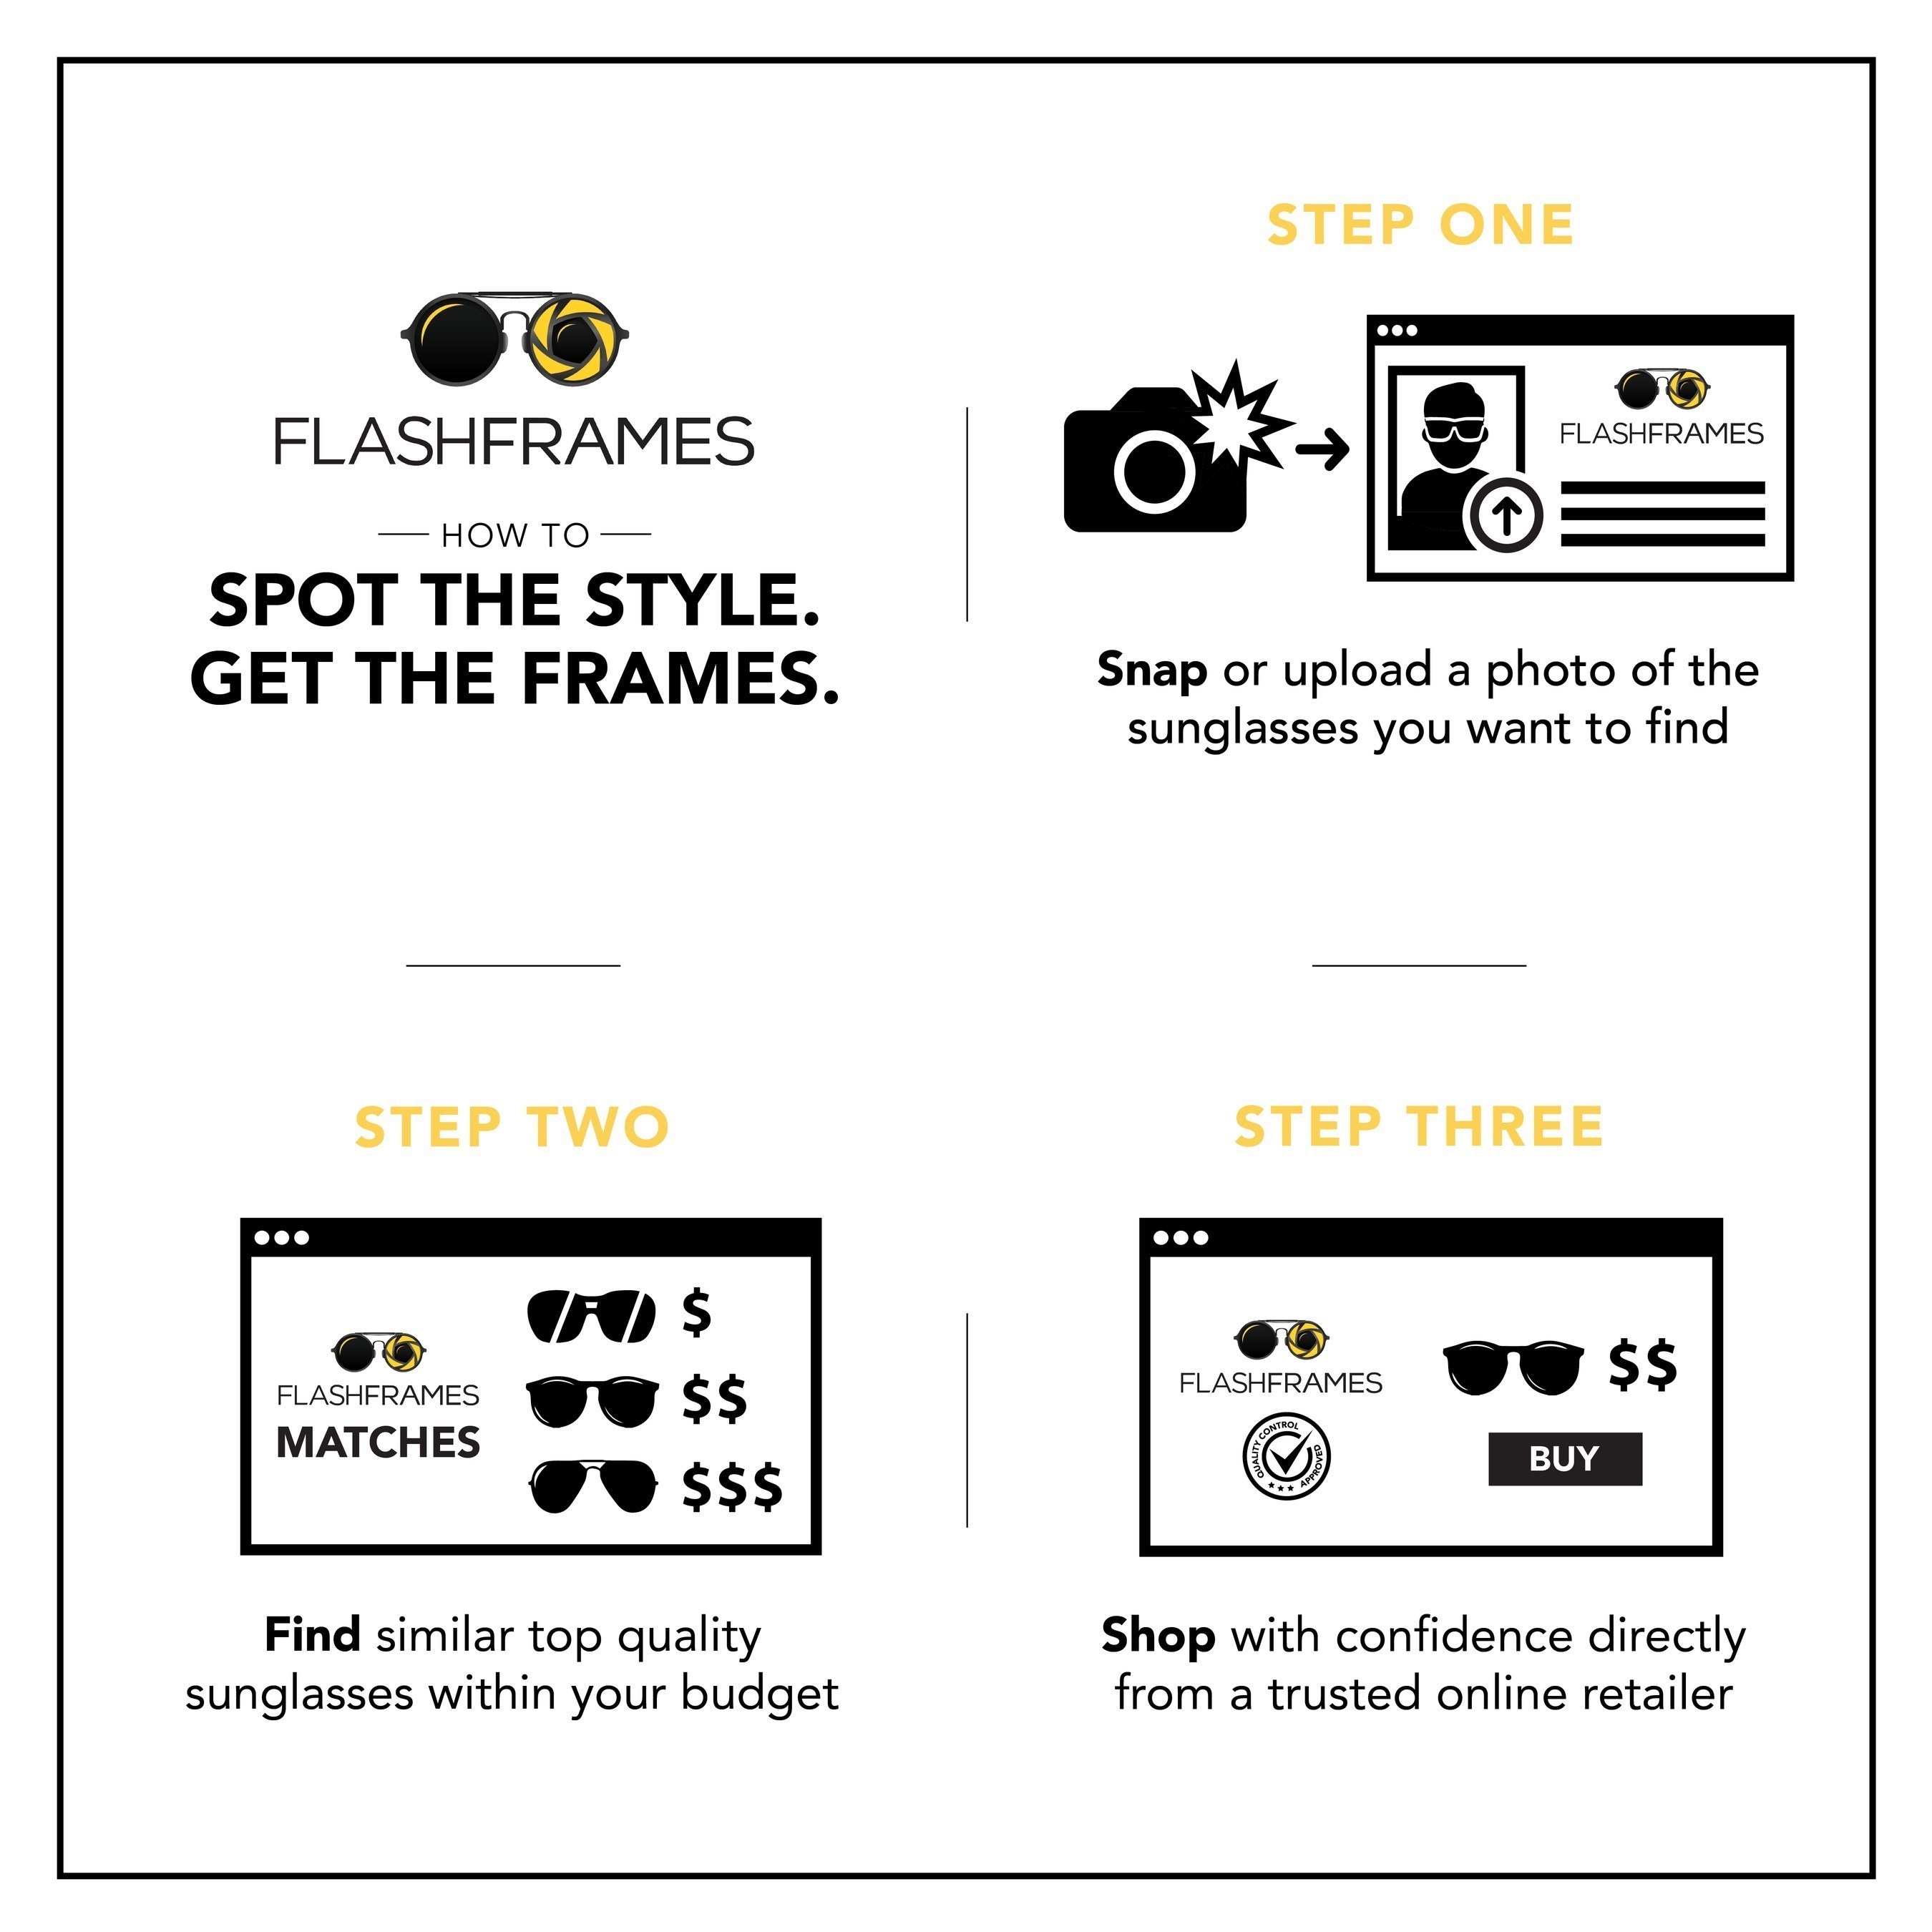 With three simple steps, shoppers can snap or upload a photo of frames they want, find options across price points from trusted online retailers and shop for the perfect pair to be sent for home delivery. It's the easiest way to spot the style of eyewear consumers want and get a pair of frames they love.